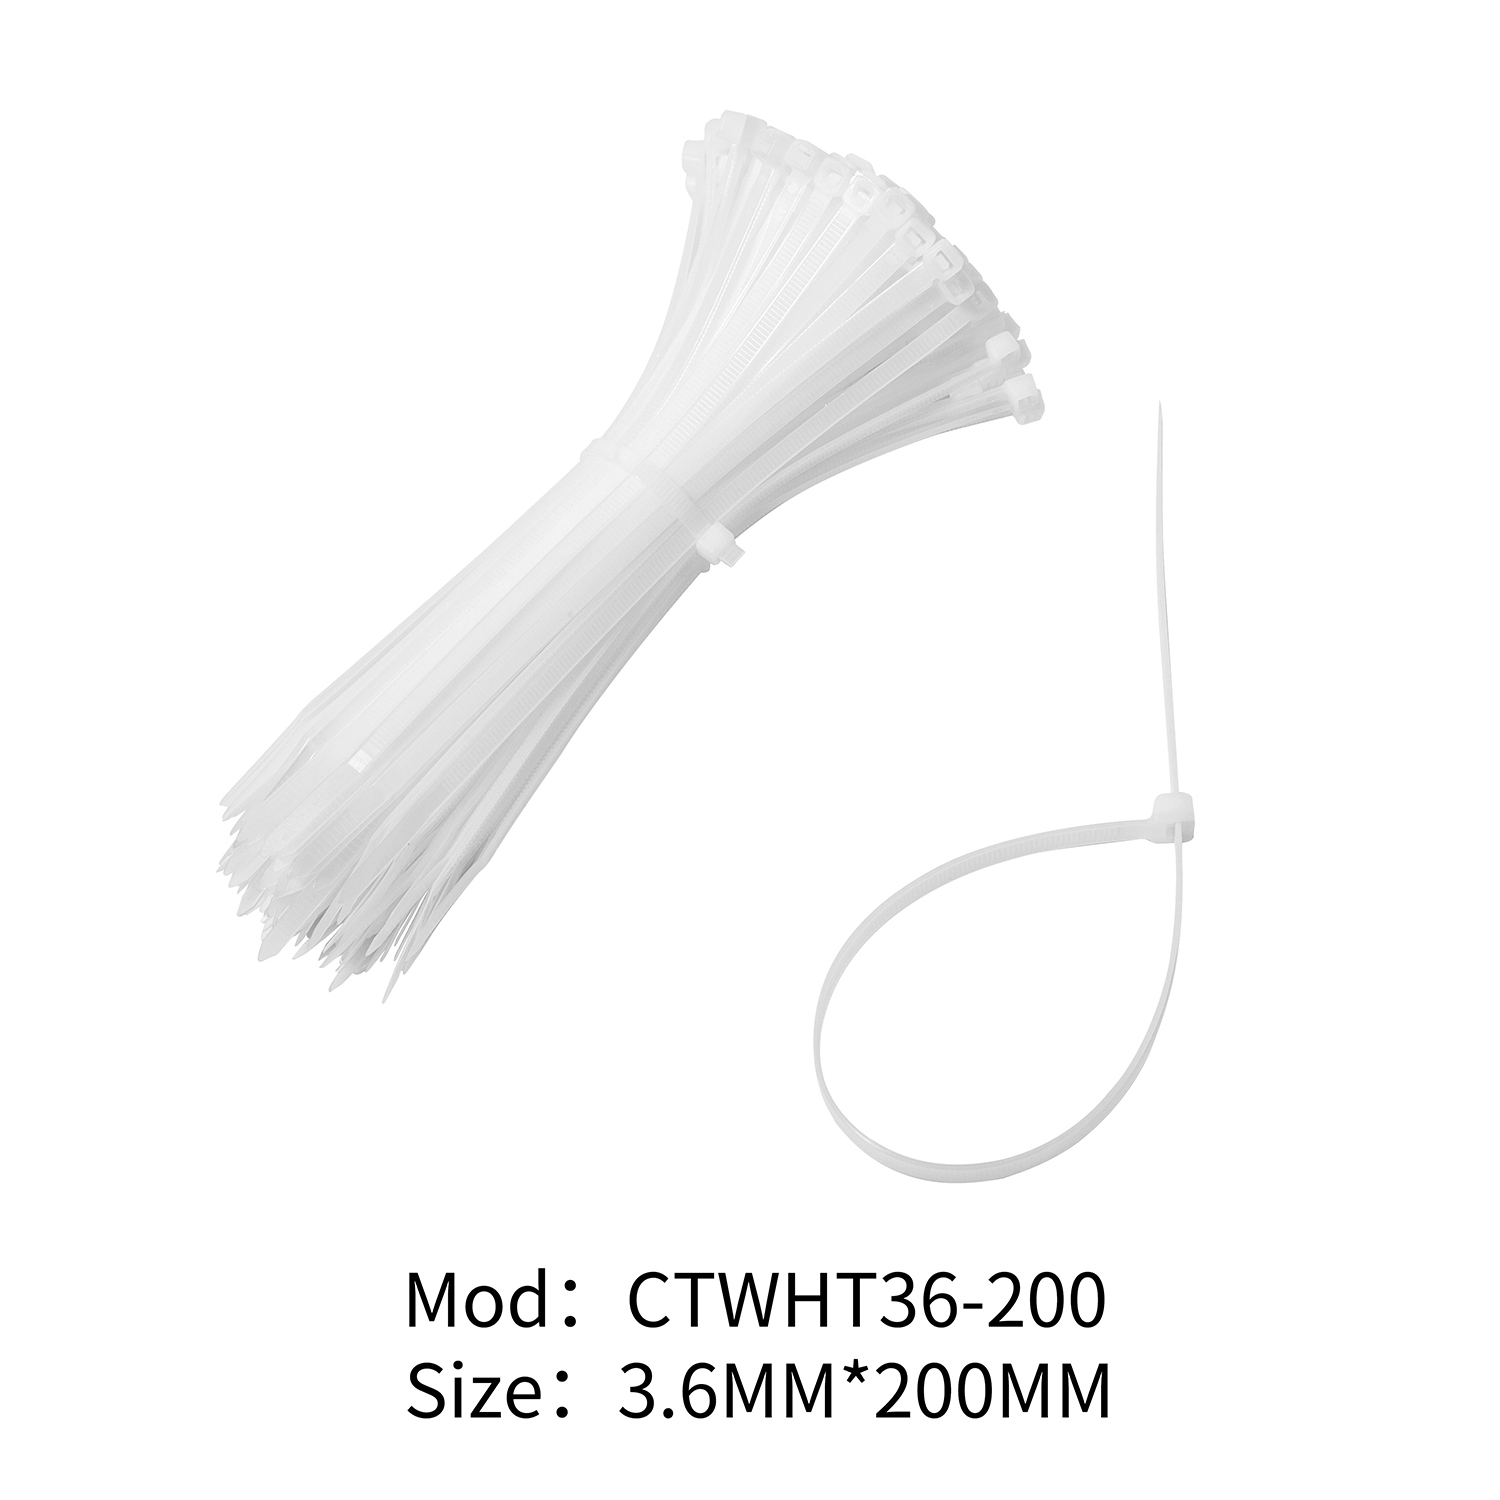 White Cable Ties 3.6 x 200mm -500Piece - Stanley Packaging